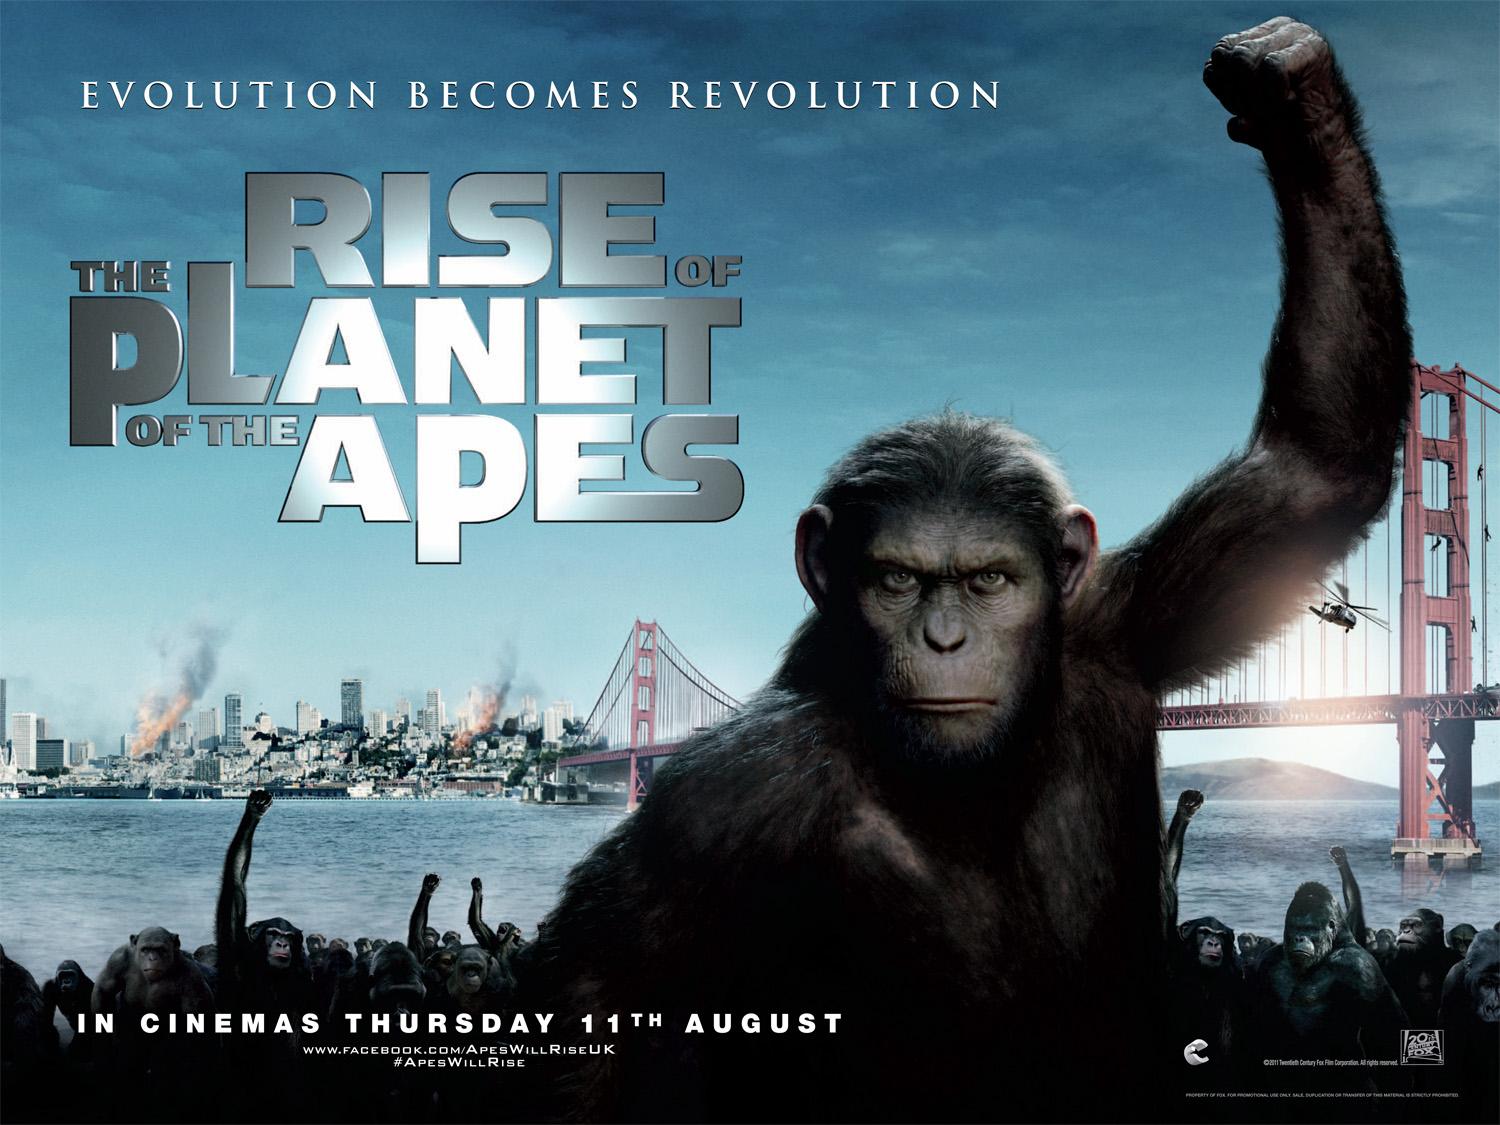 HD Rise Of The Planet Of The Apes Wallpaper and Photo. HD